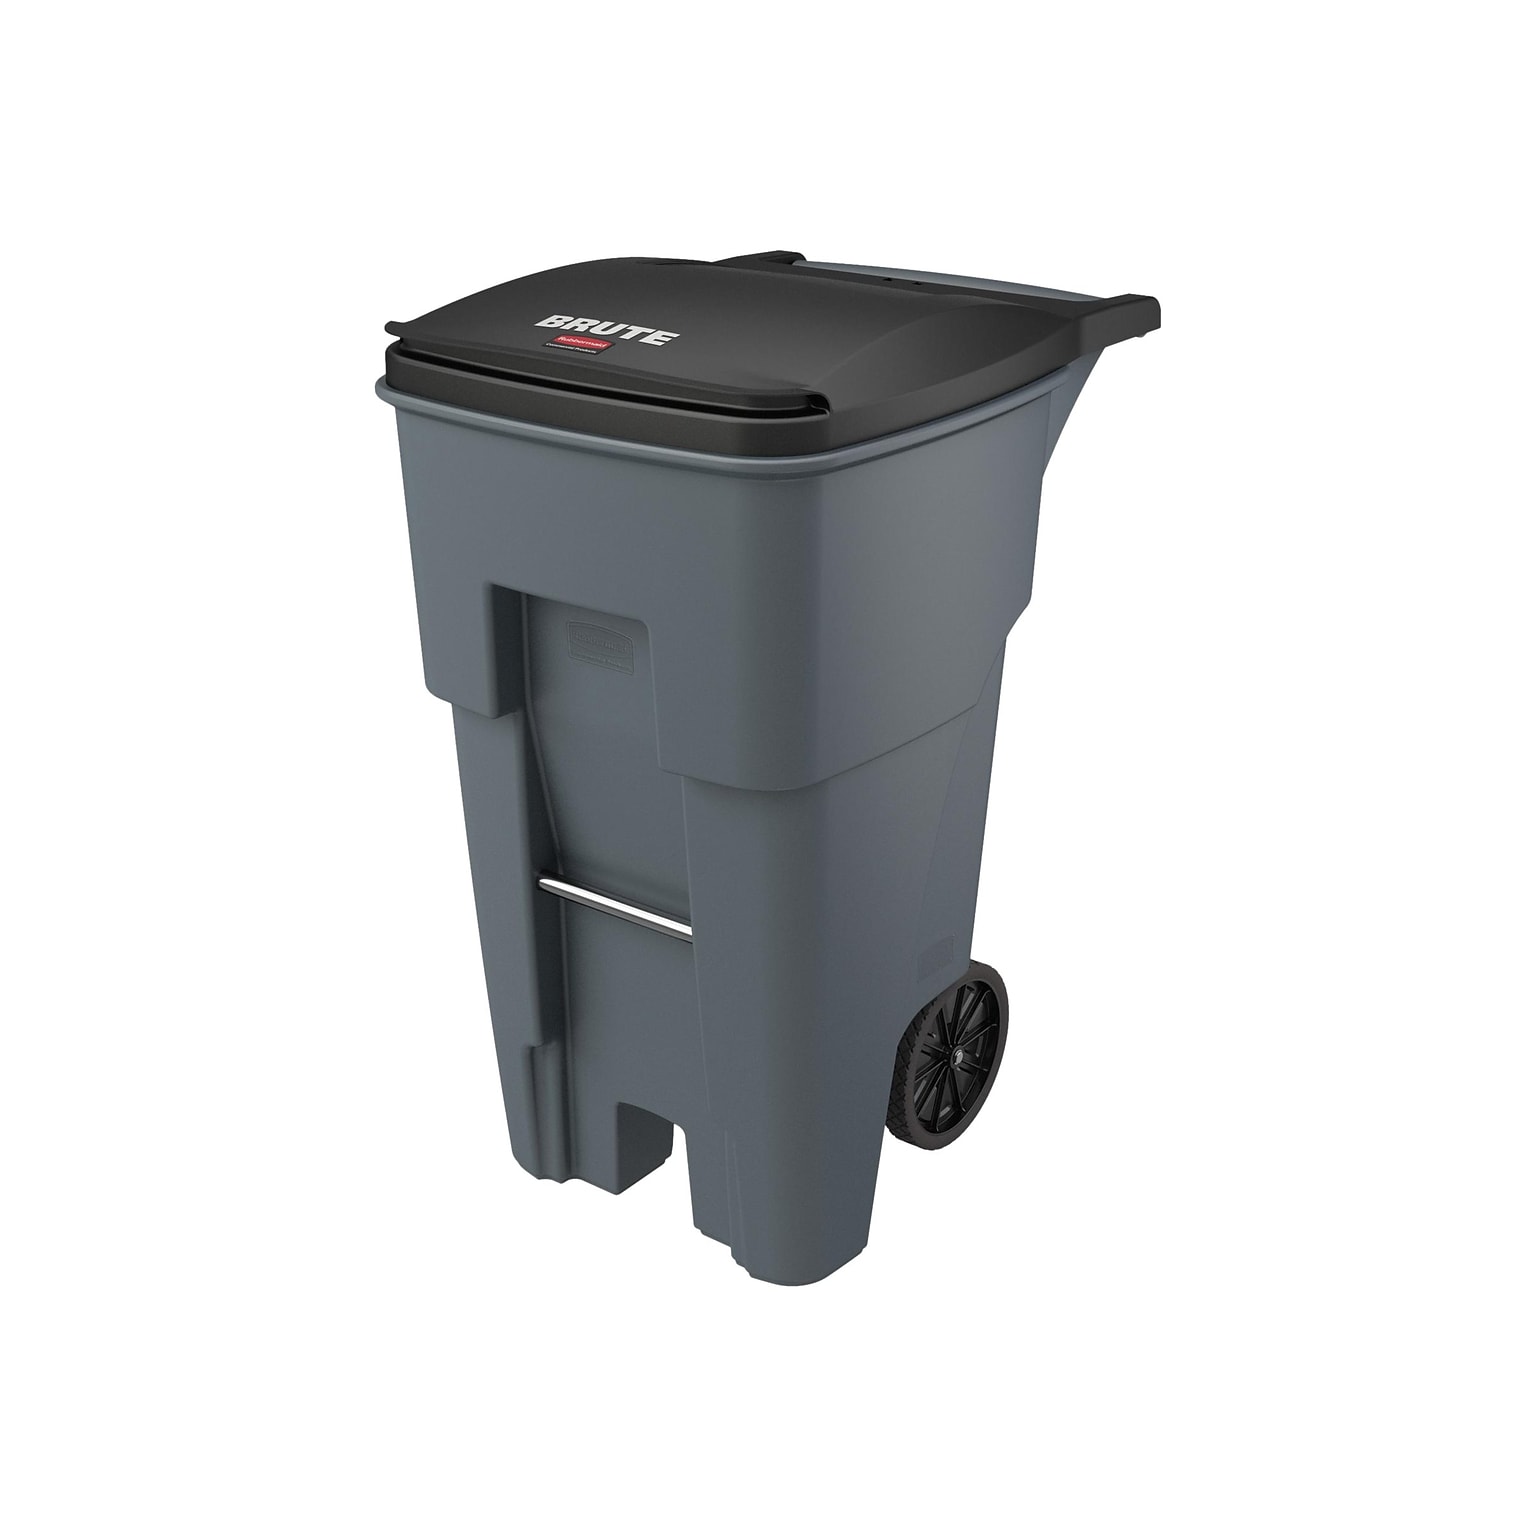 Rubbermaid BRUTE Rollout Outdoor Trash Can with Hinged Lid, Gray Plastic, 65 Gallon, Gray (FG9W2100GRAY)